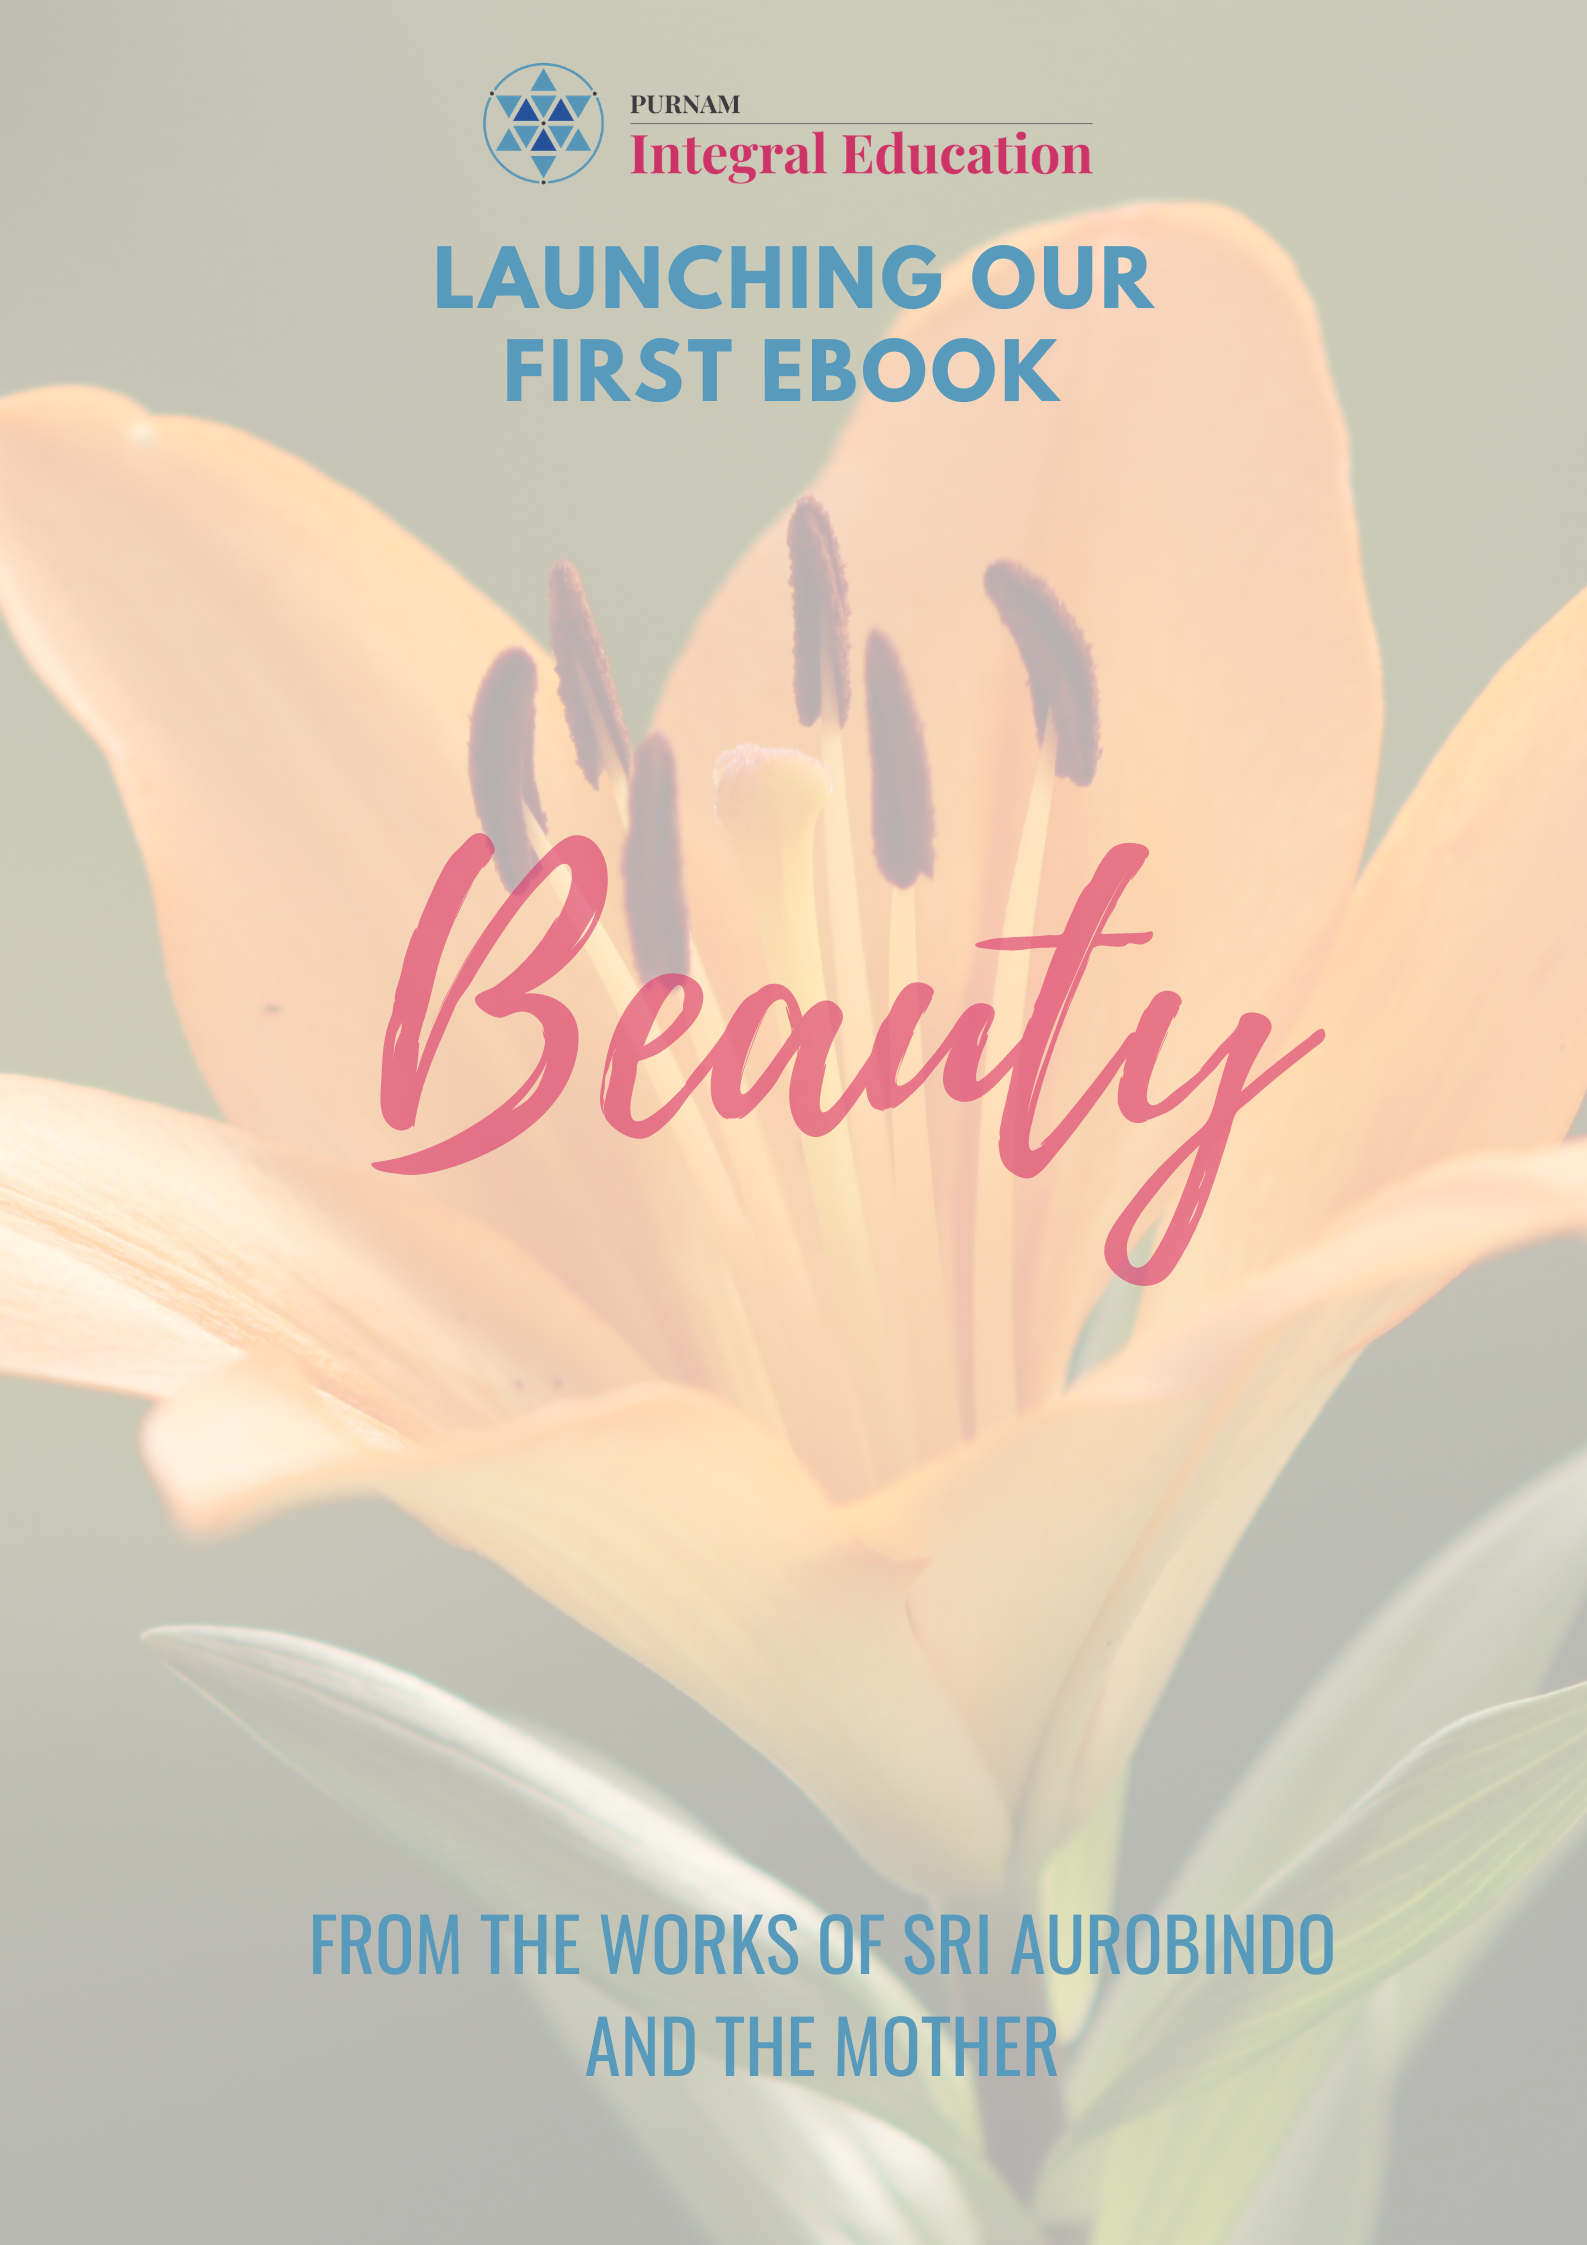 Launching our First eBook on Beauty